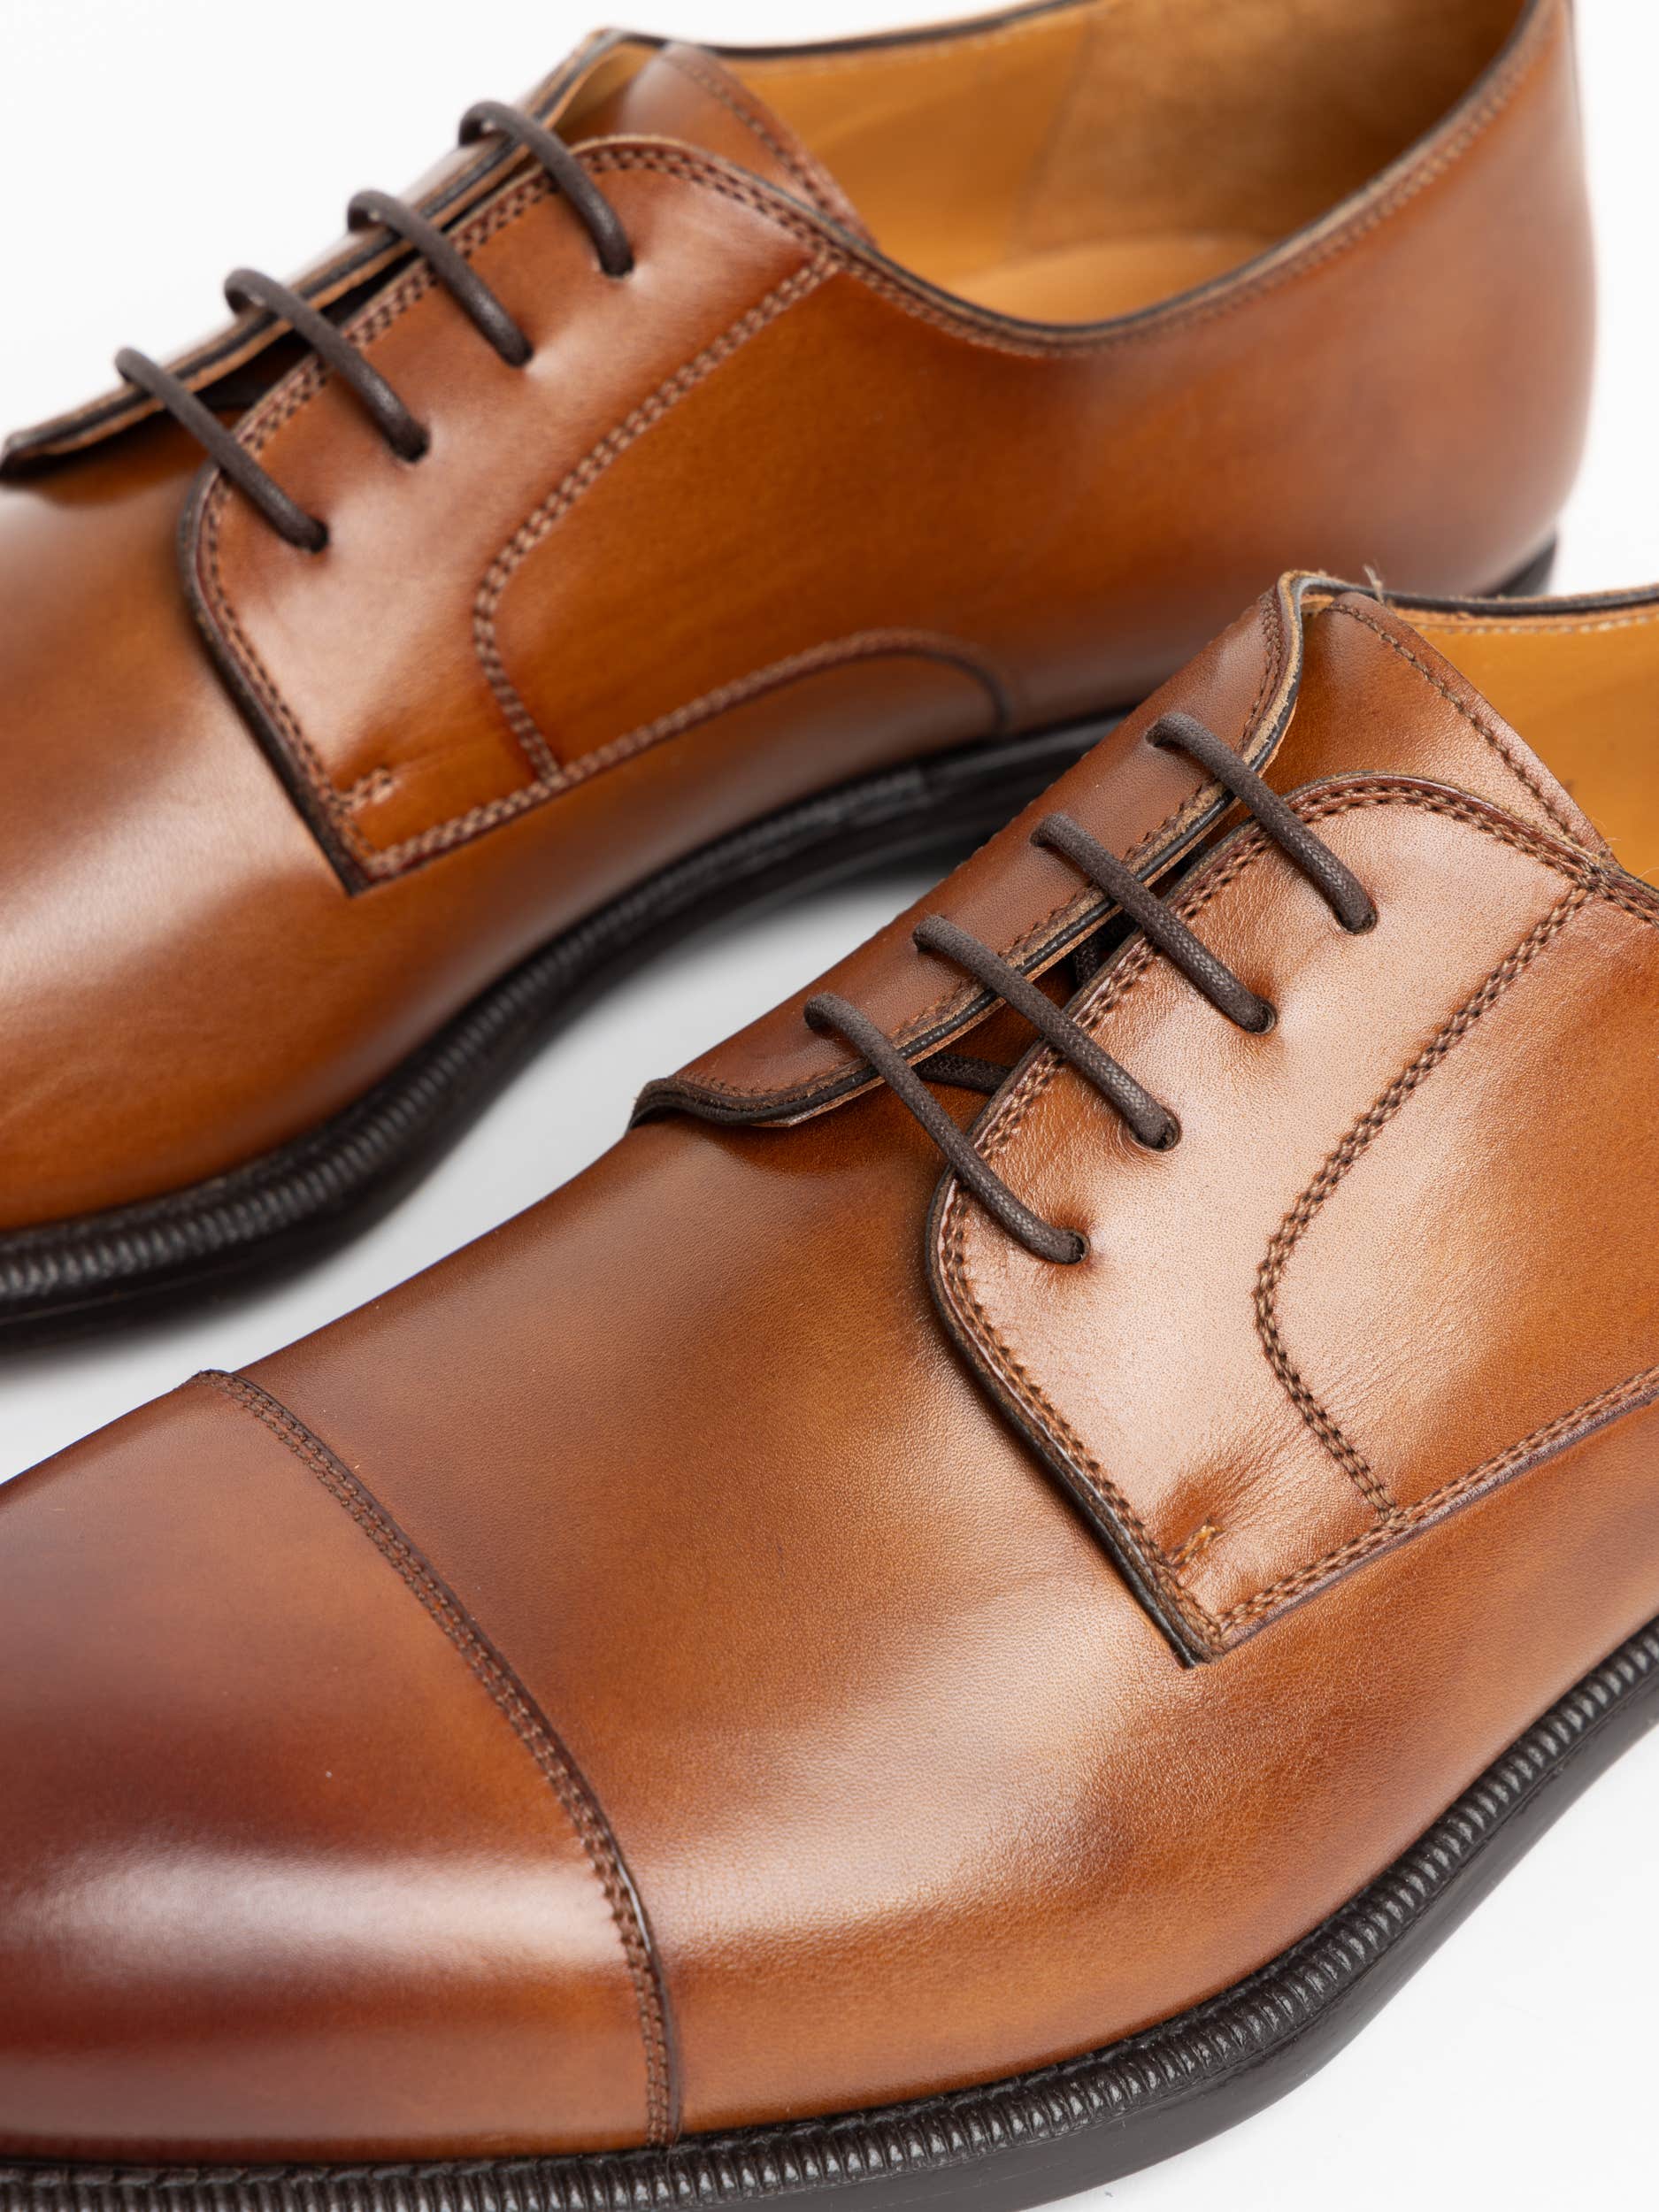 Cognac Brown Leather Harlan Derby Shoes